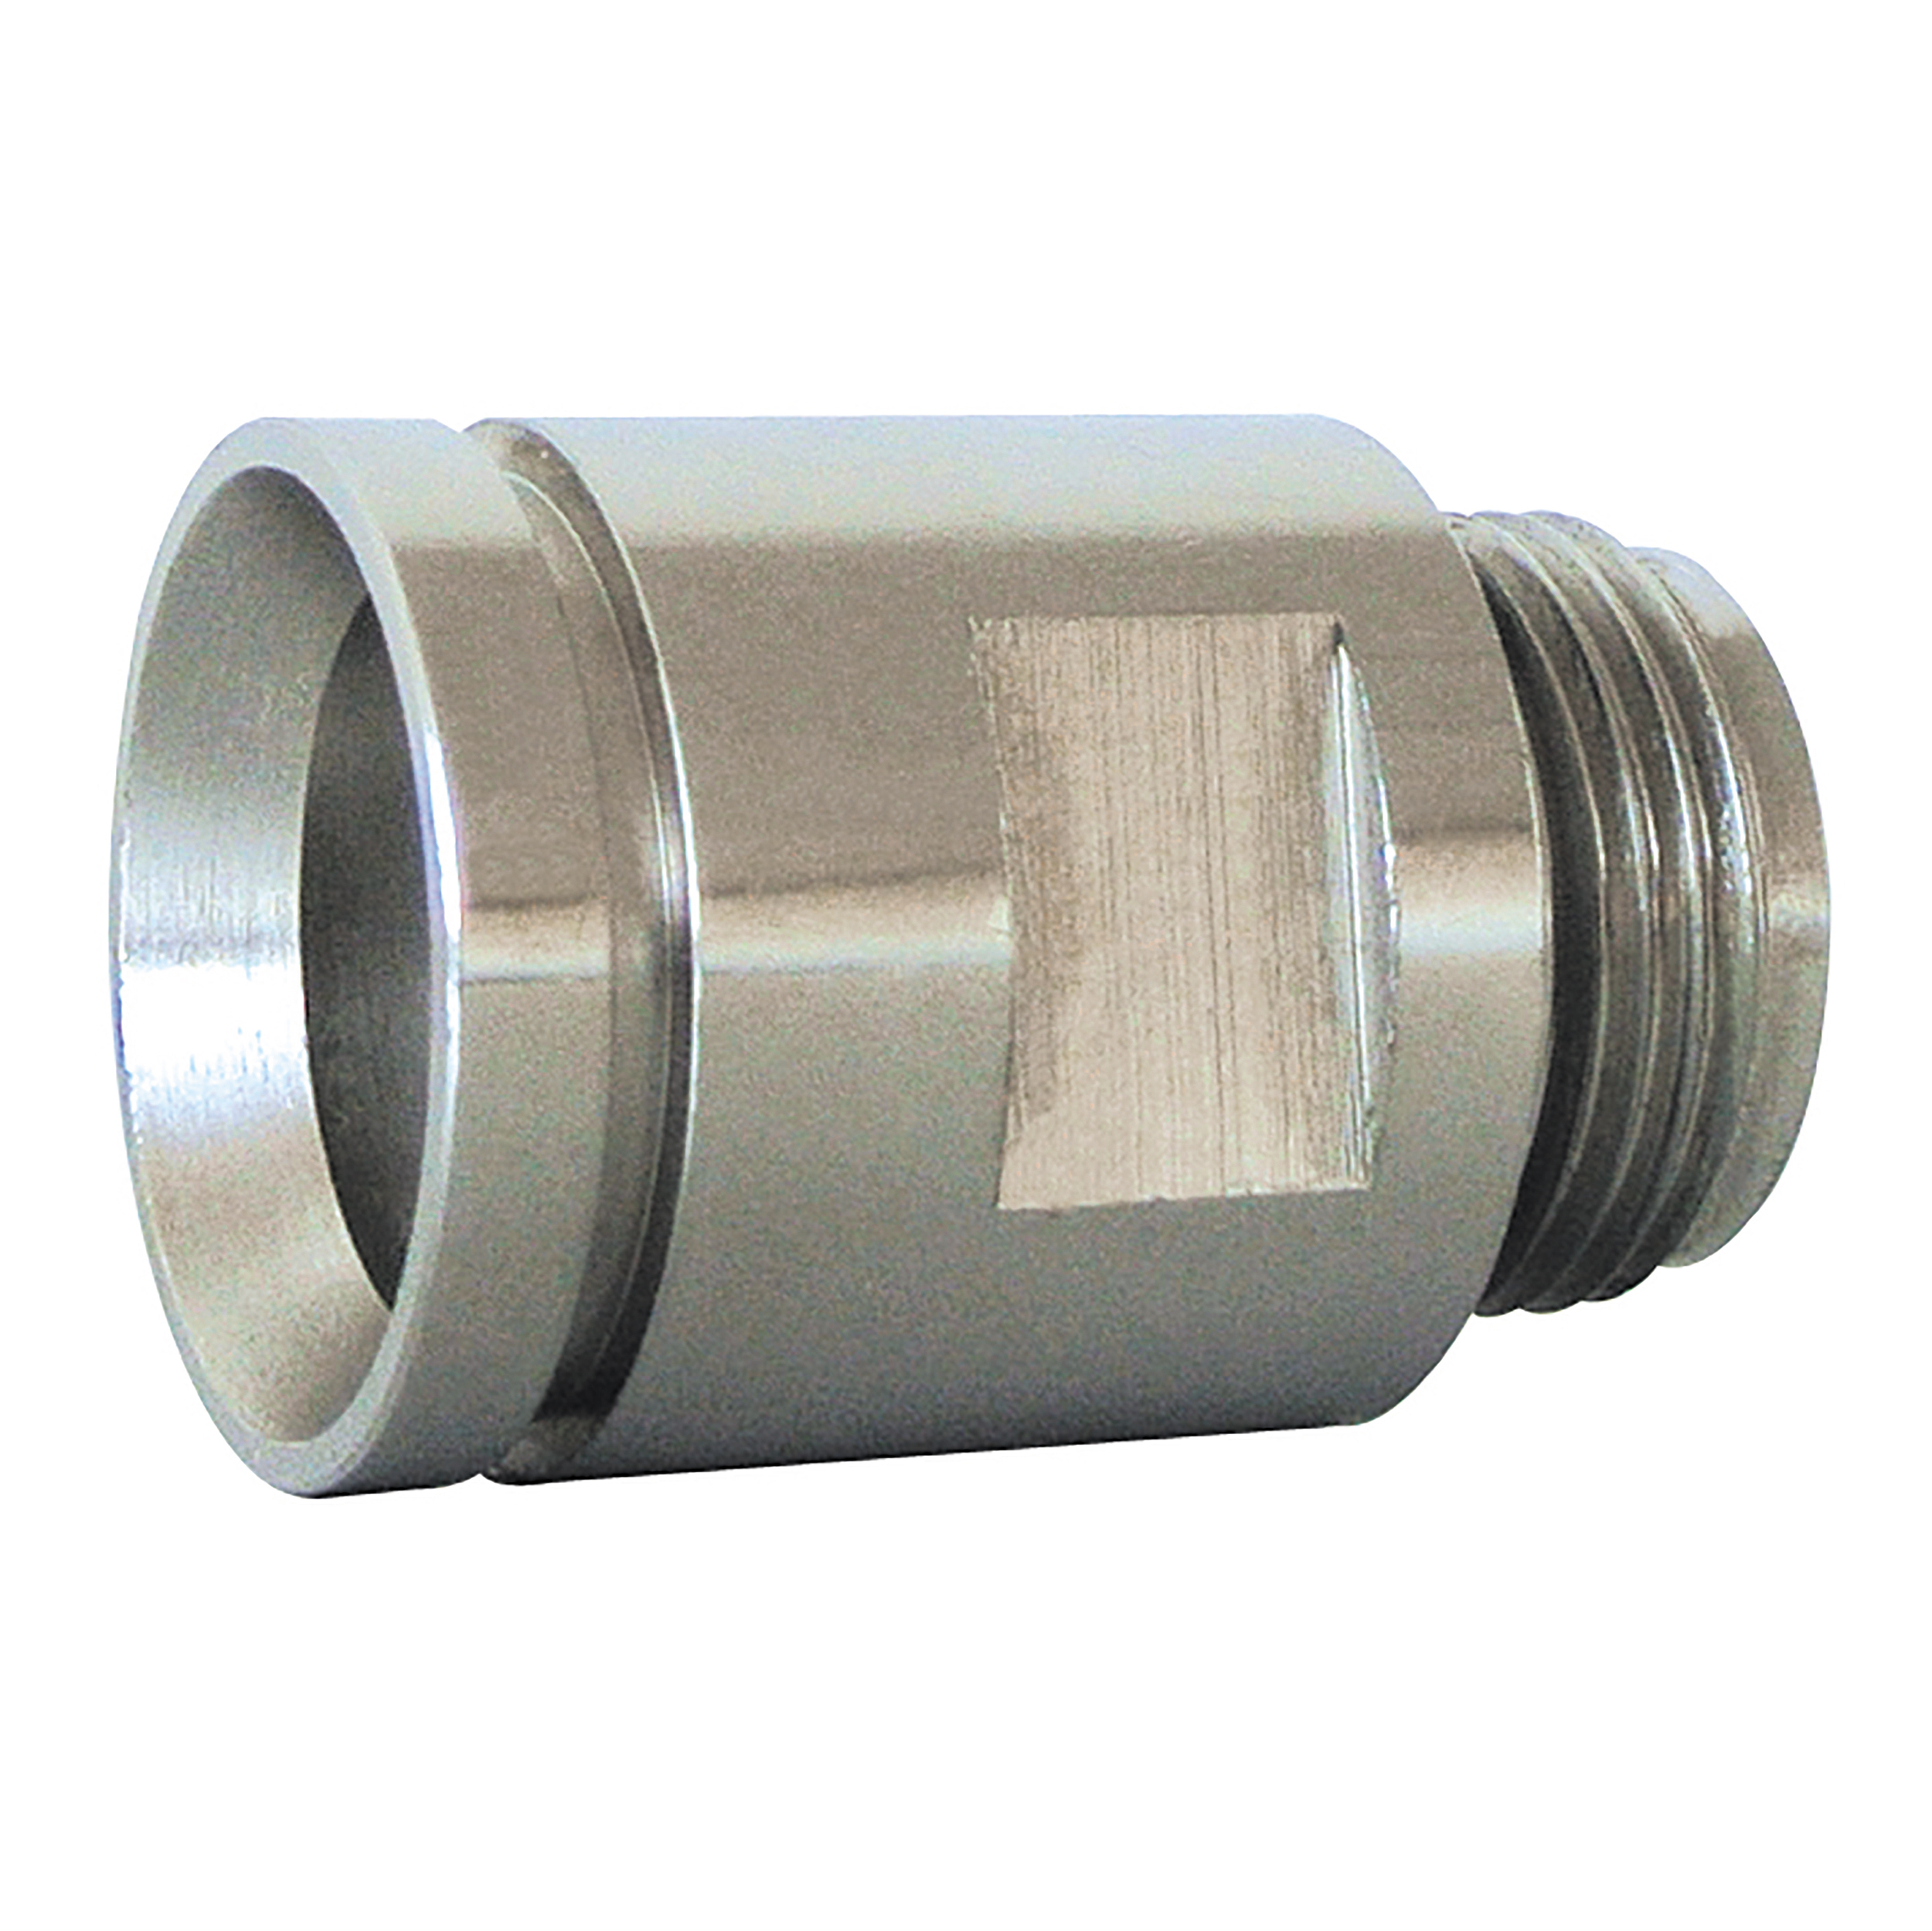 Special nozzle, nozzle-Ø4 mm, length: 28 mm, connection thread: M 21 × 1.5, with an o-ring, for 416